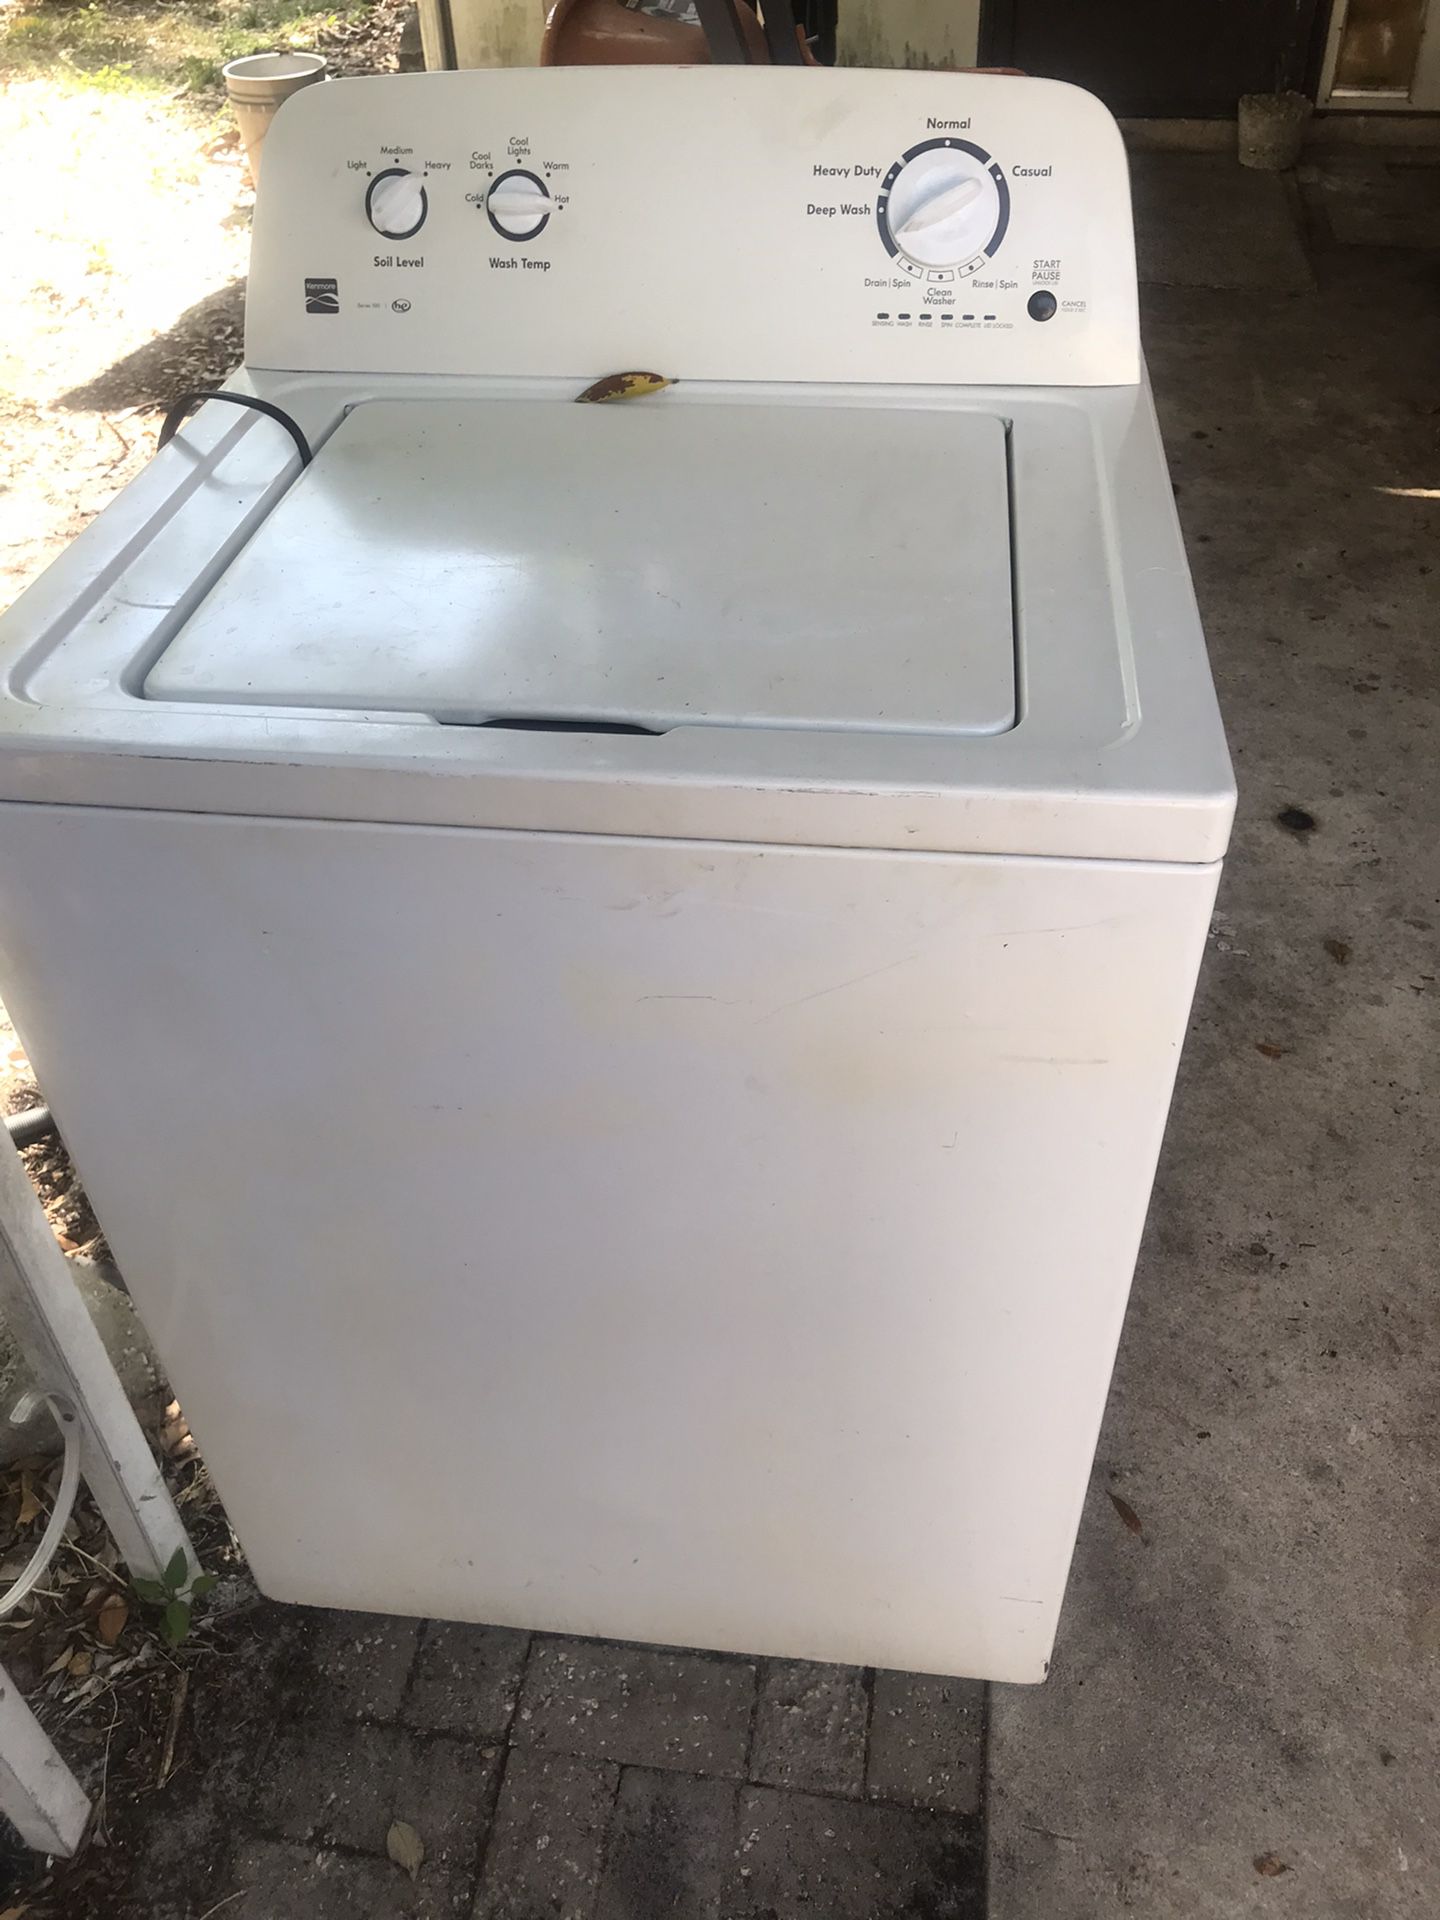 Used Washer Machine For Sale  Kenmore $150